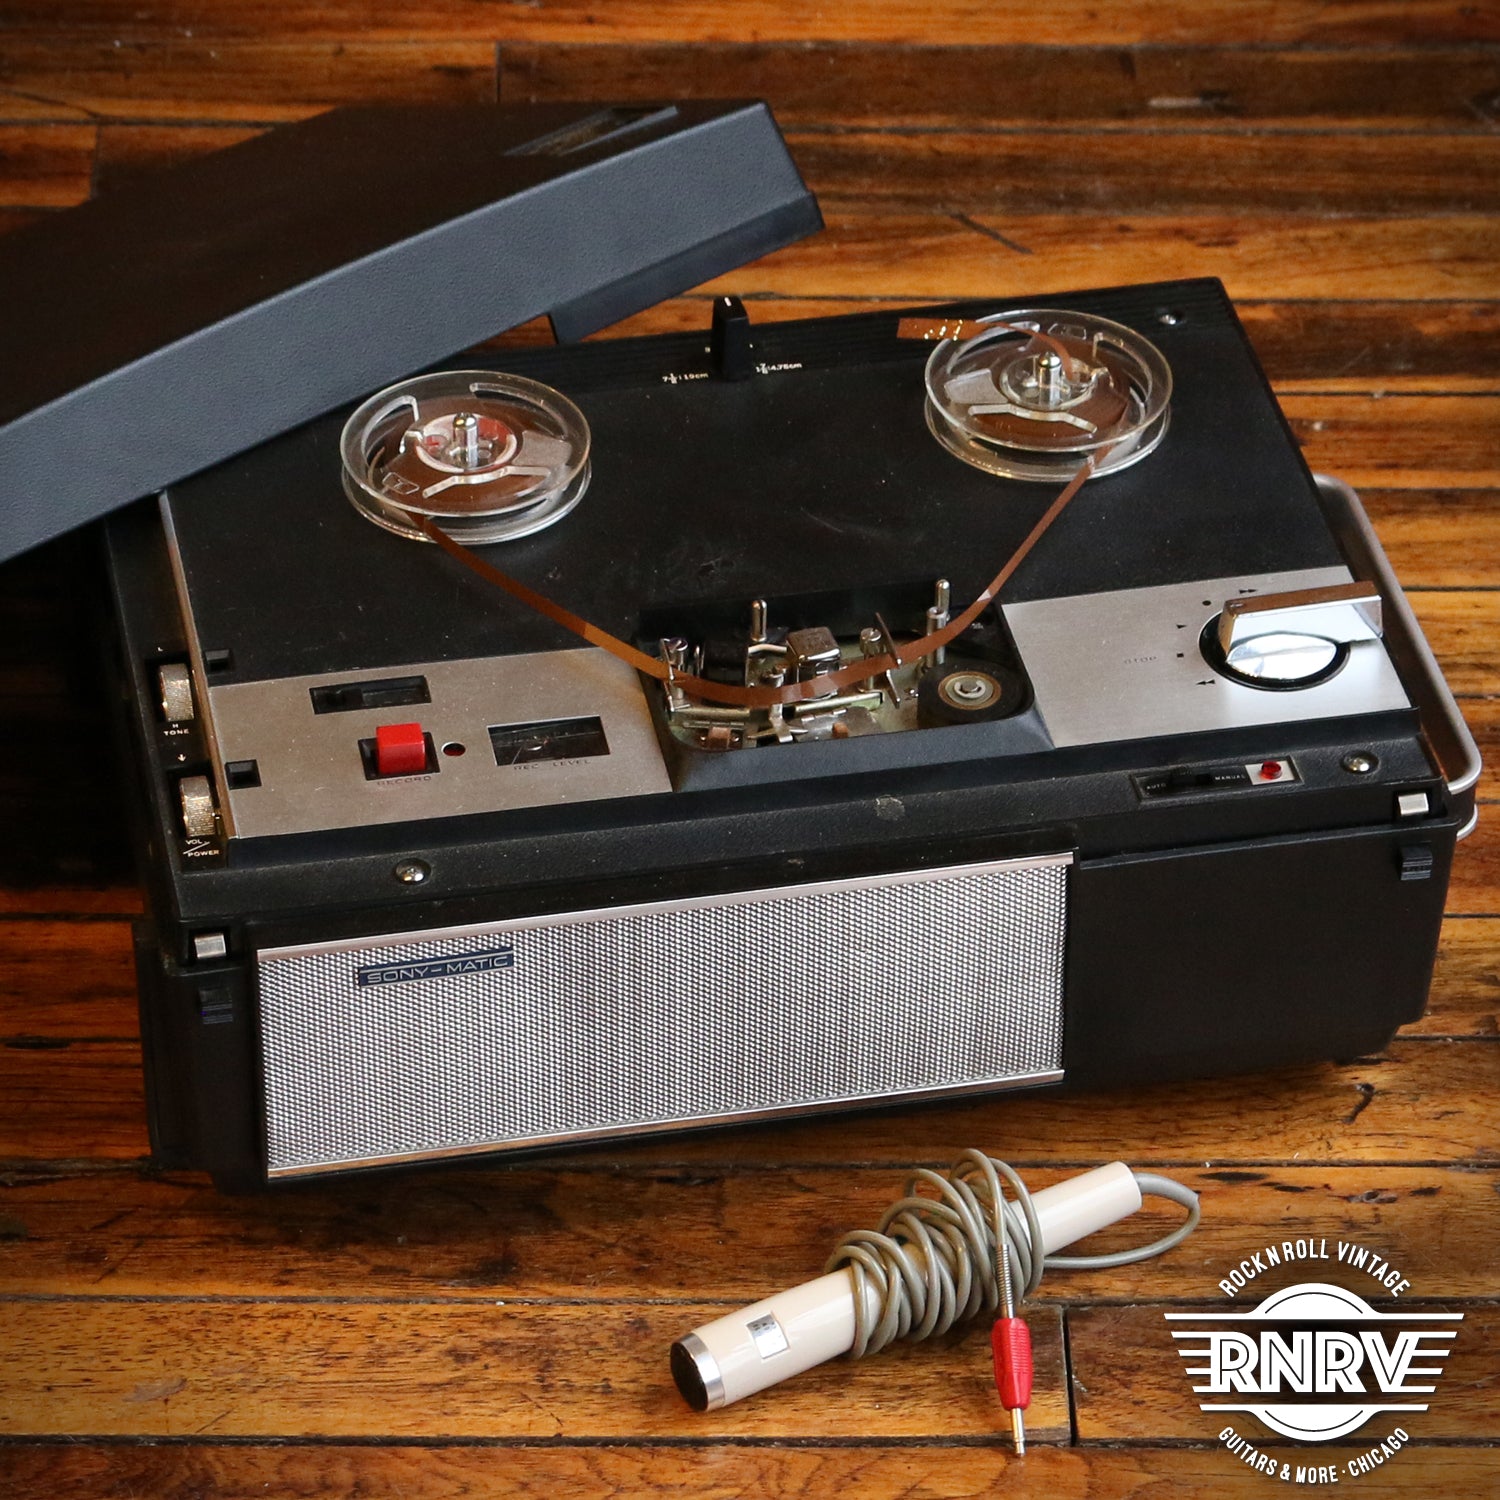 Sony Sony-matic TC-104A Reel to Reel Tape Recorder